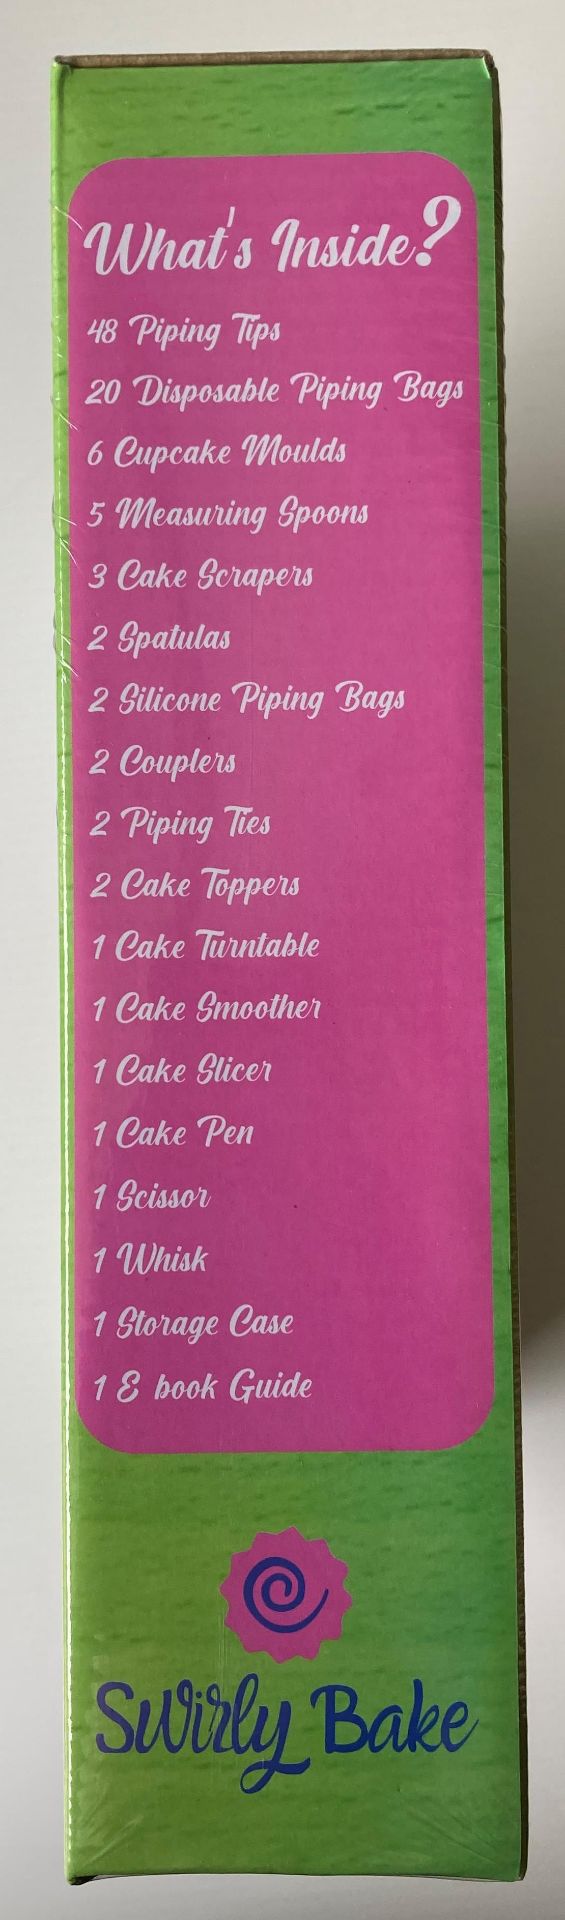 16 x Swirly Bake Cake Decorating Kits (E-book included) (1 x outer box) (saleroom location: - Image 3 of 3